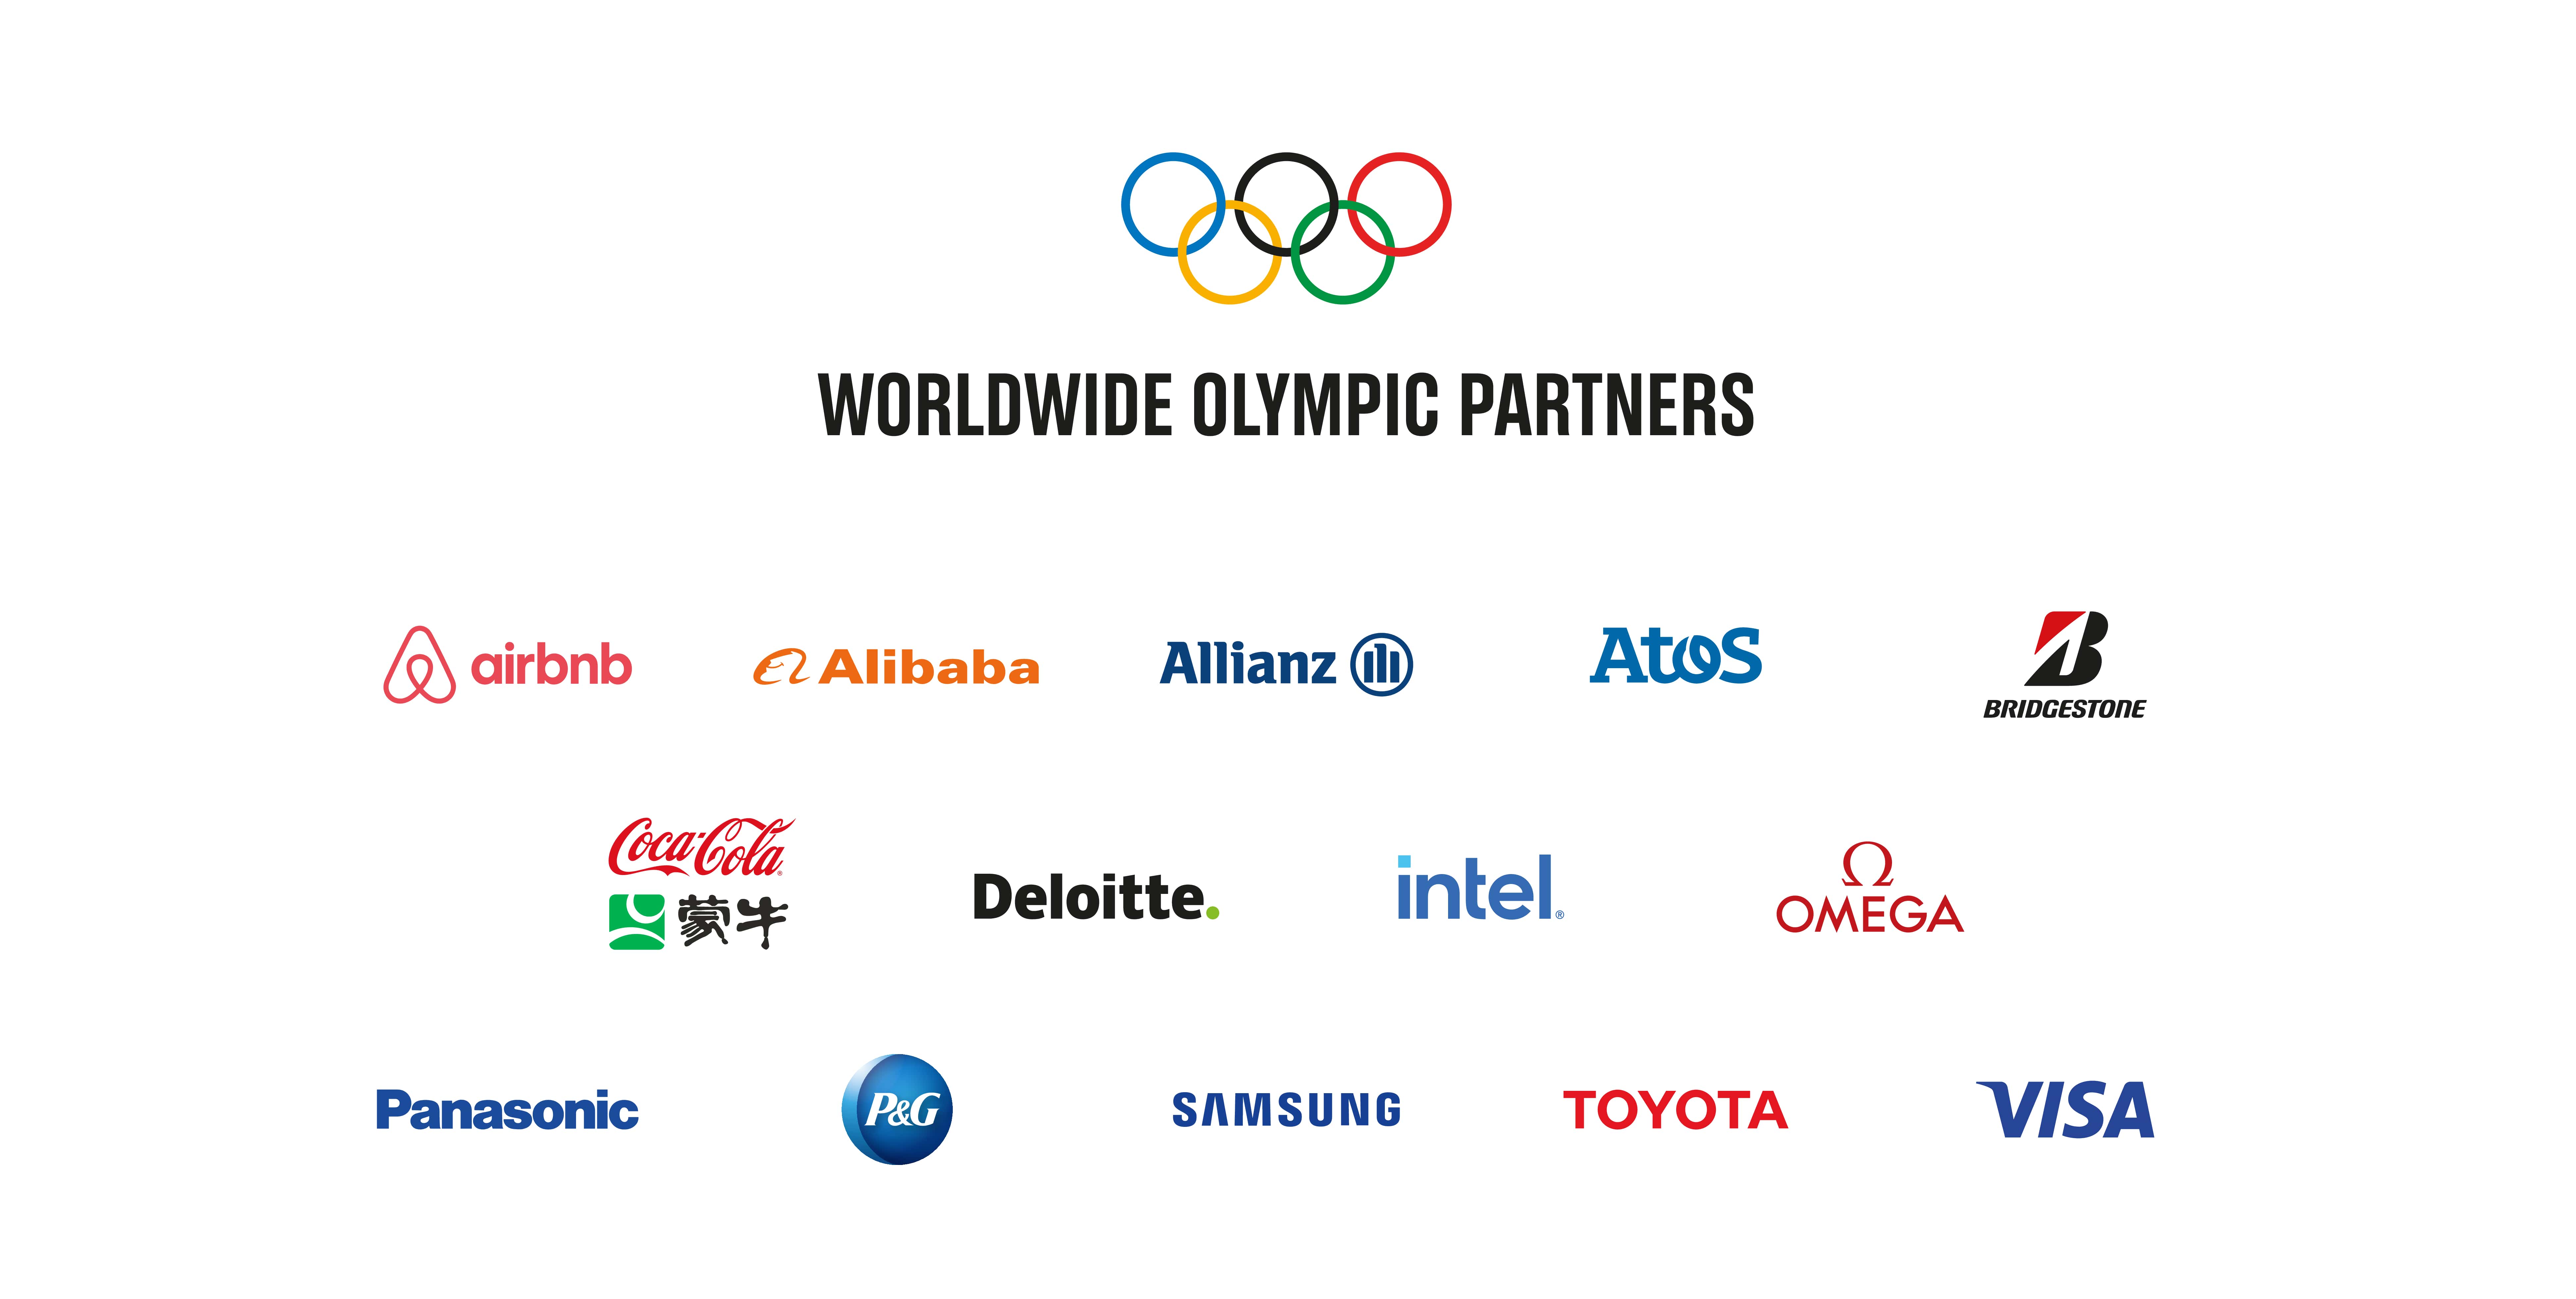 The Worldwide Olympic Partners